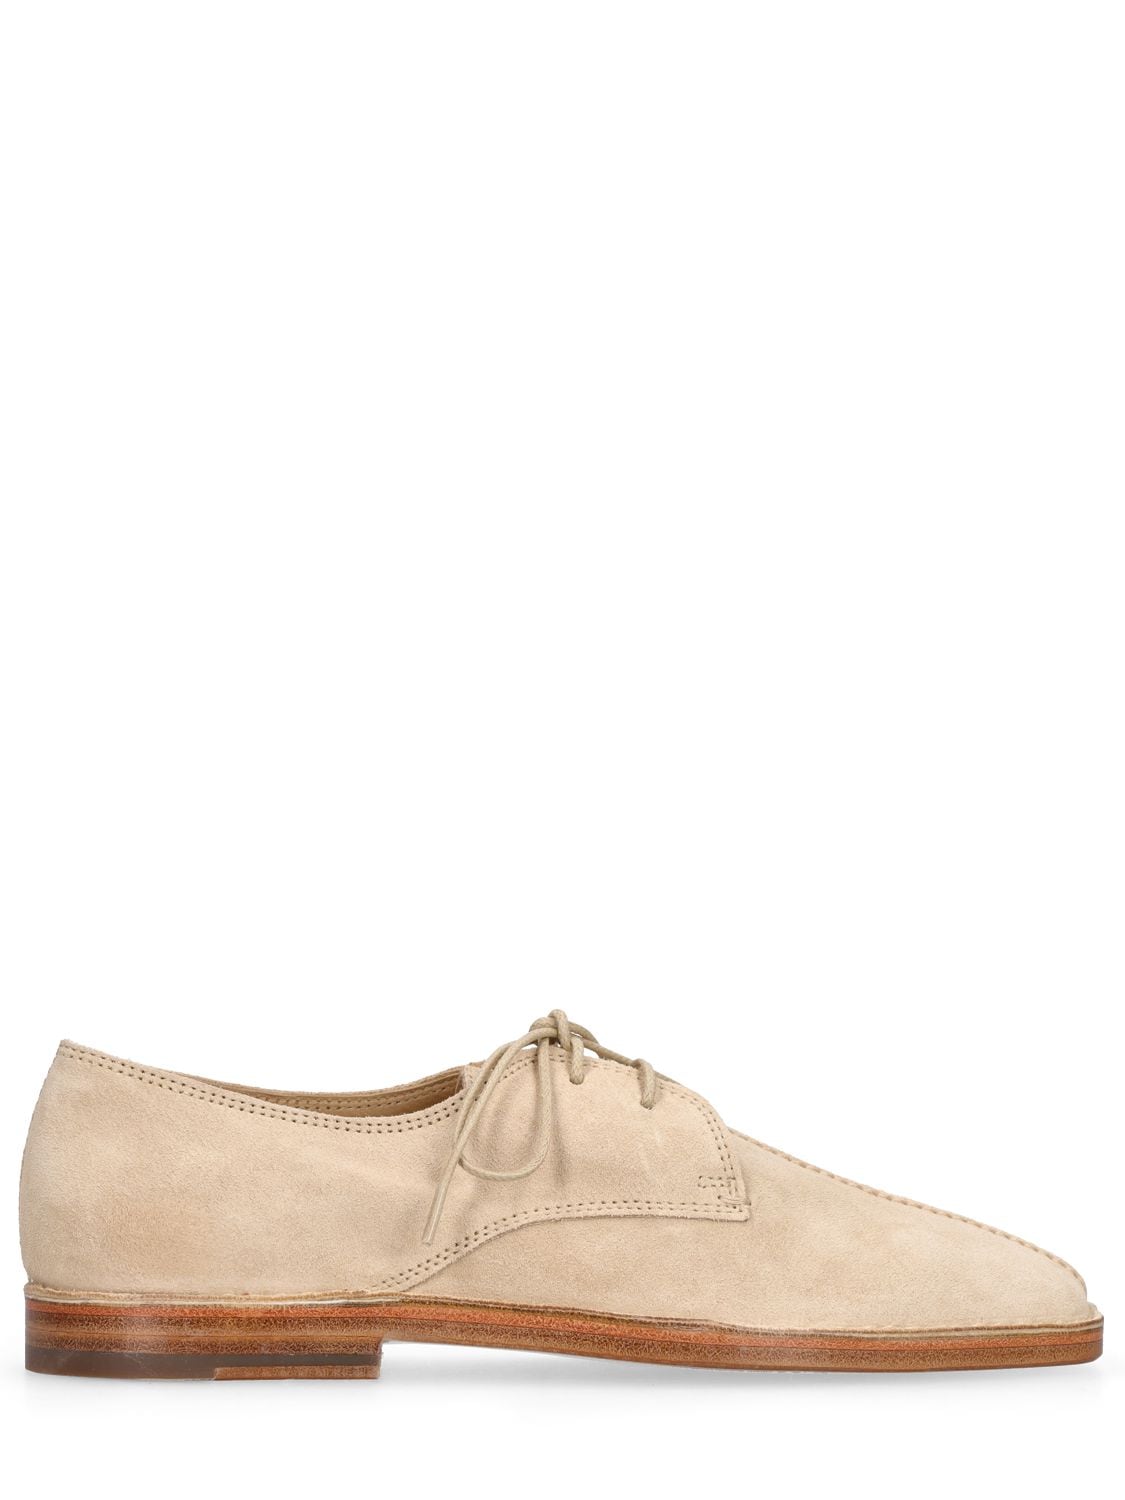 Mm Derby Suede Loafers - LEMAIRE - Modalova